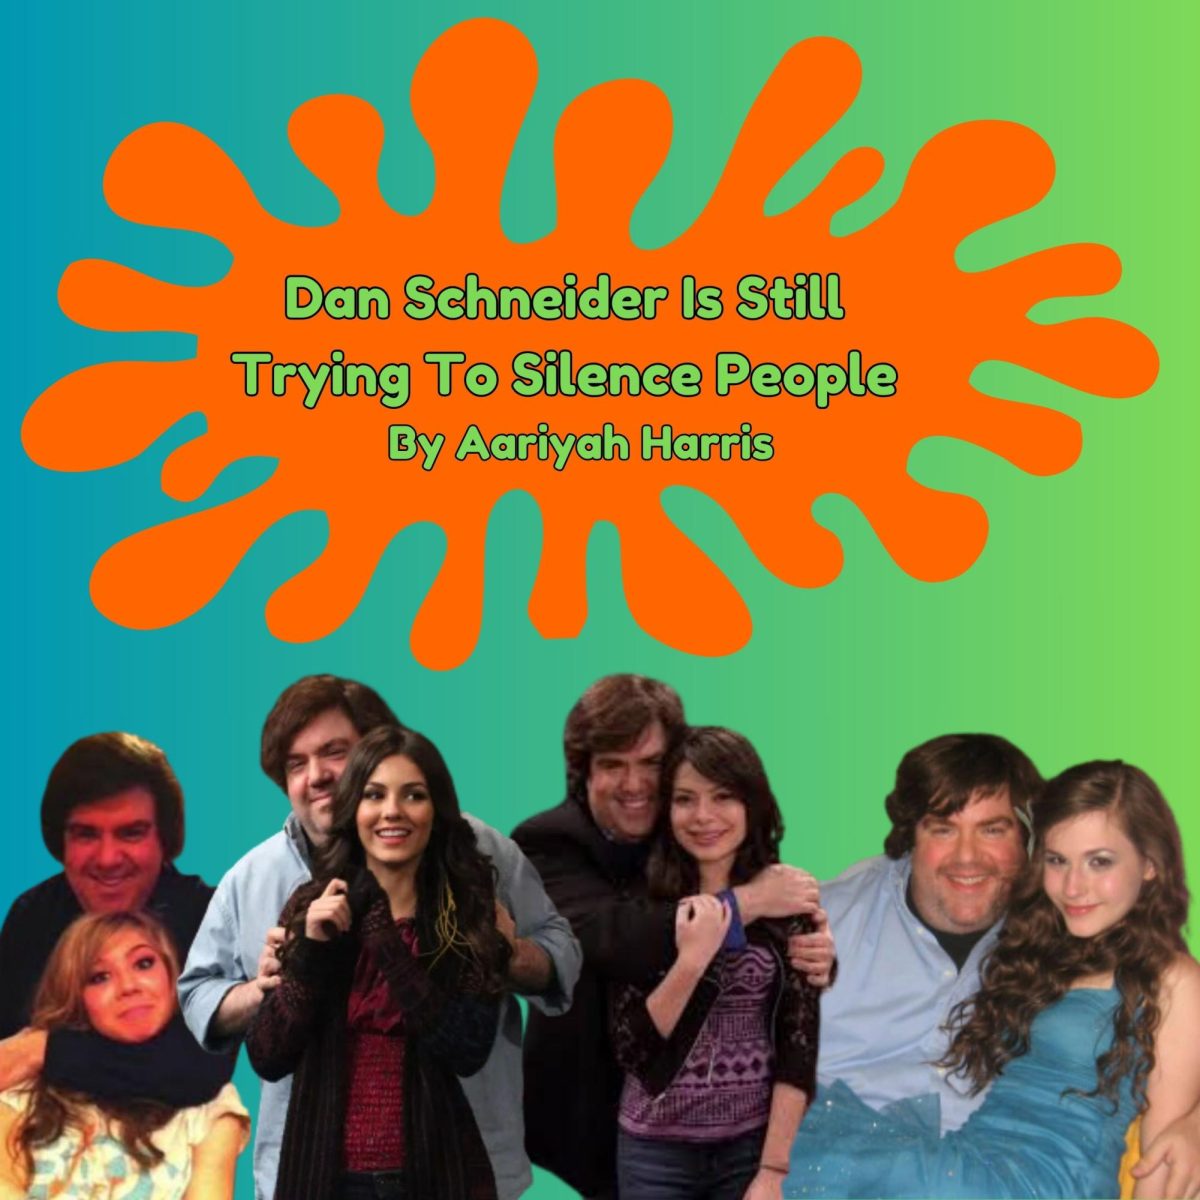 Dan Schneider Is Still Trying To Silence People